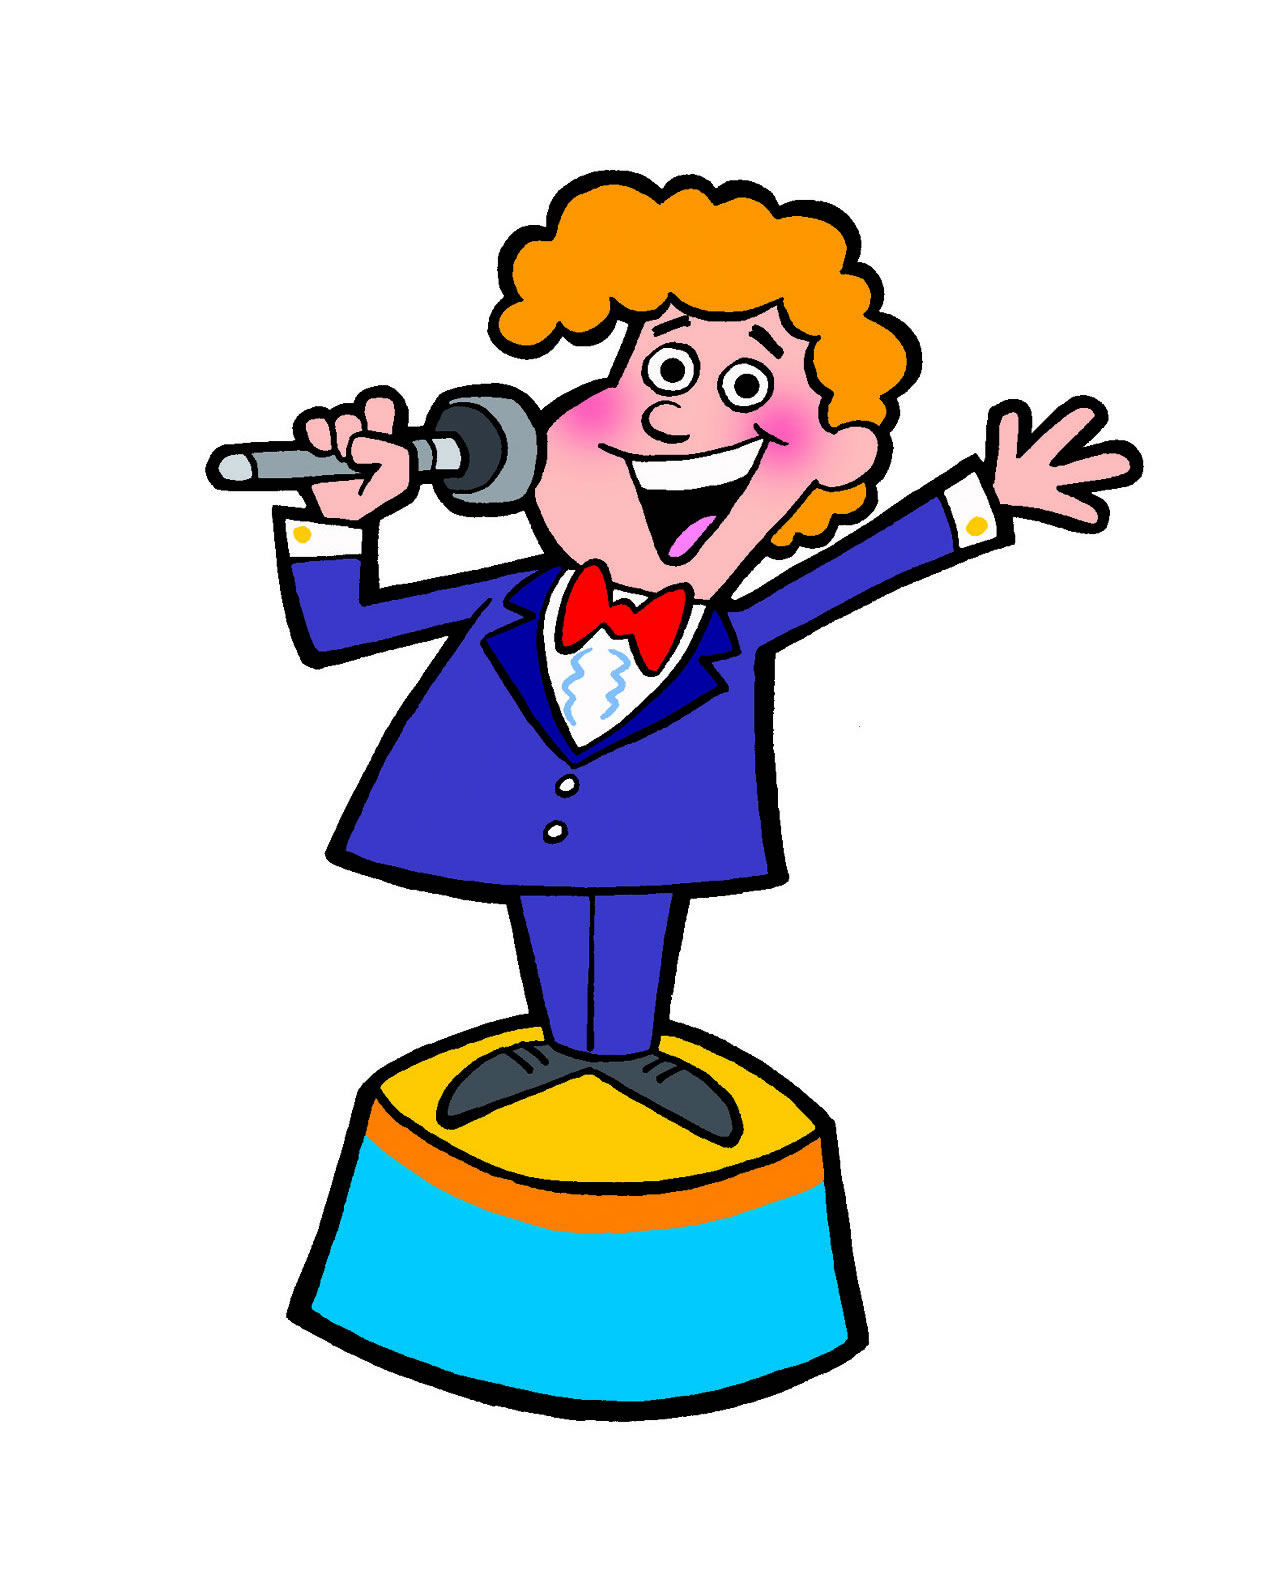 Comedy Night Clipart - ClipArt Best